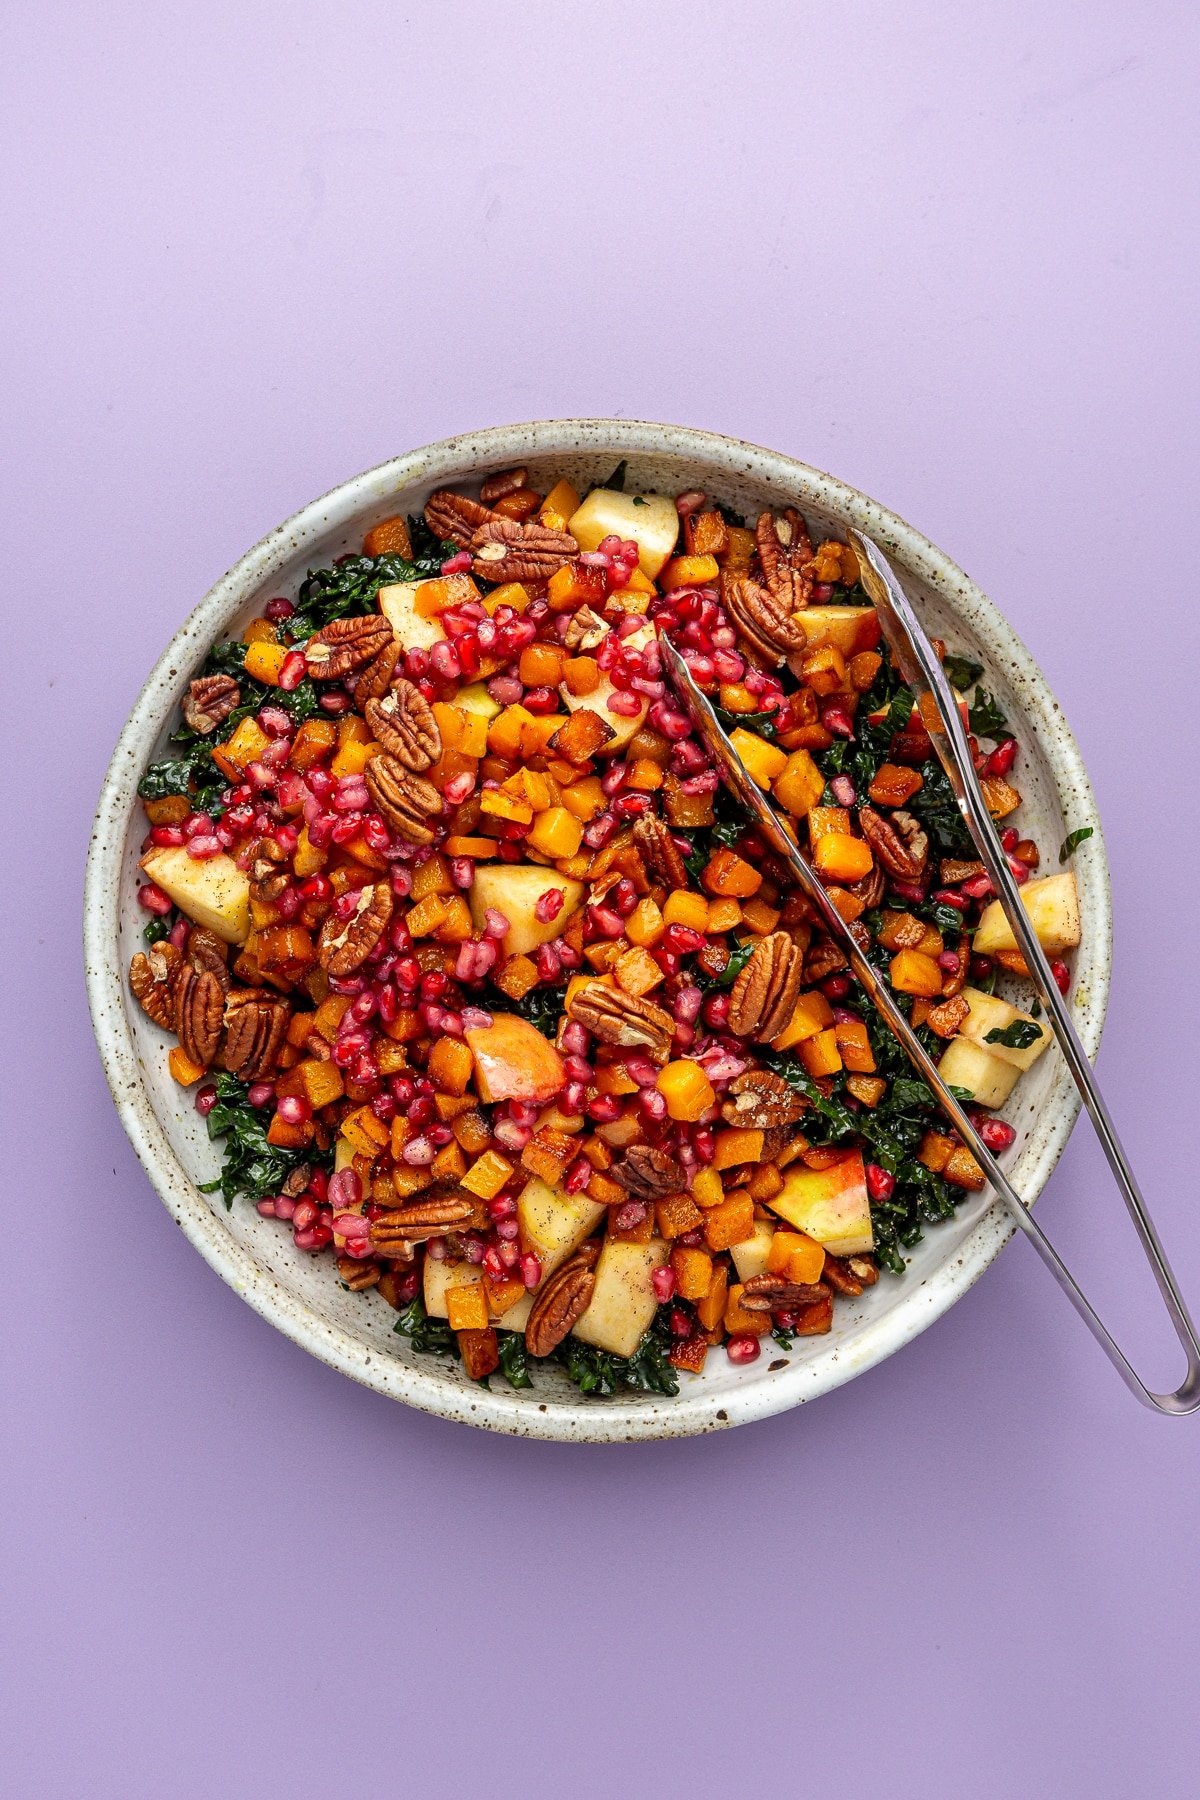 Remaining ingredients, including pomegranate seeds, pecans, and apple chunks, have been poured on top of the chopped kale. Tongs sit to the side.